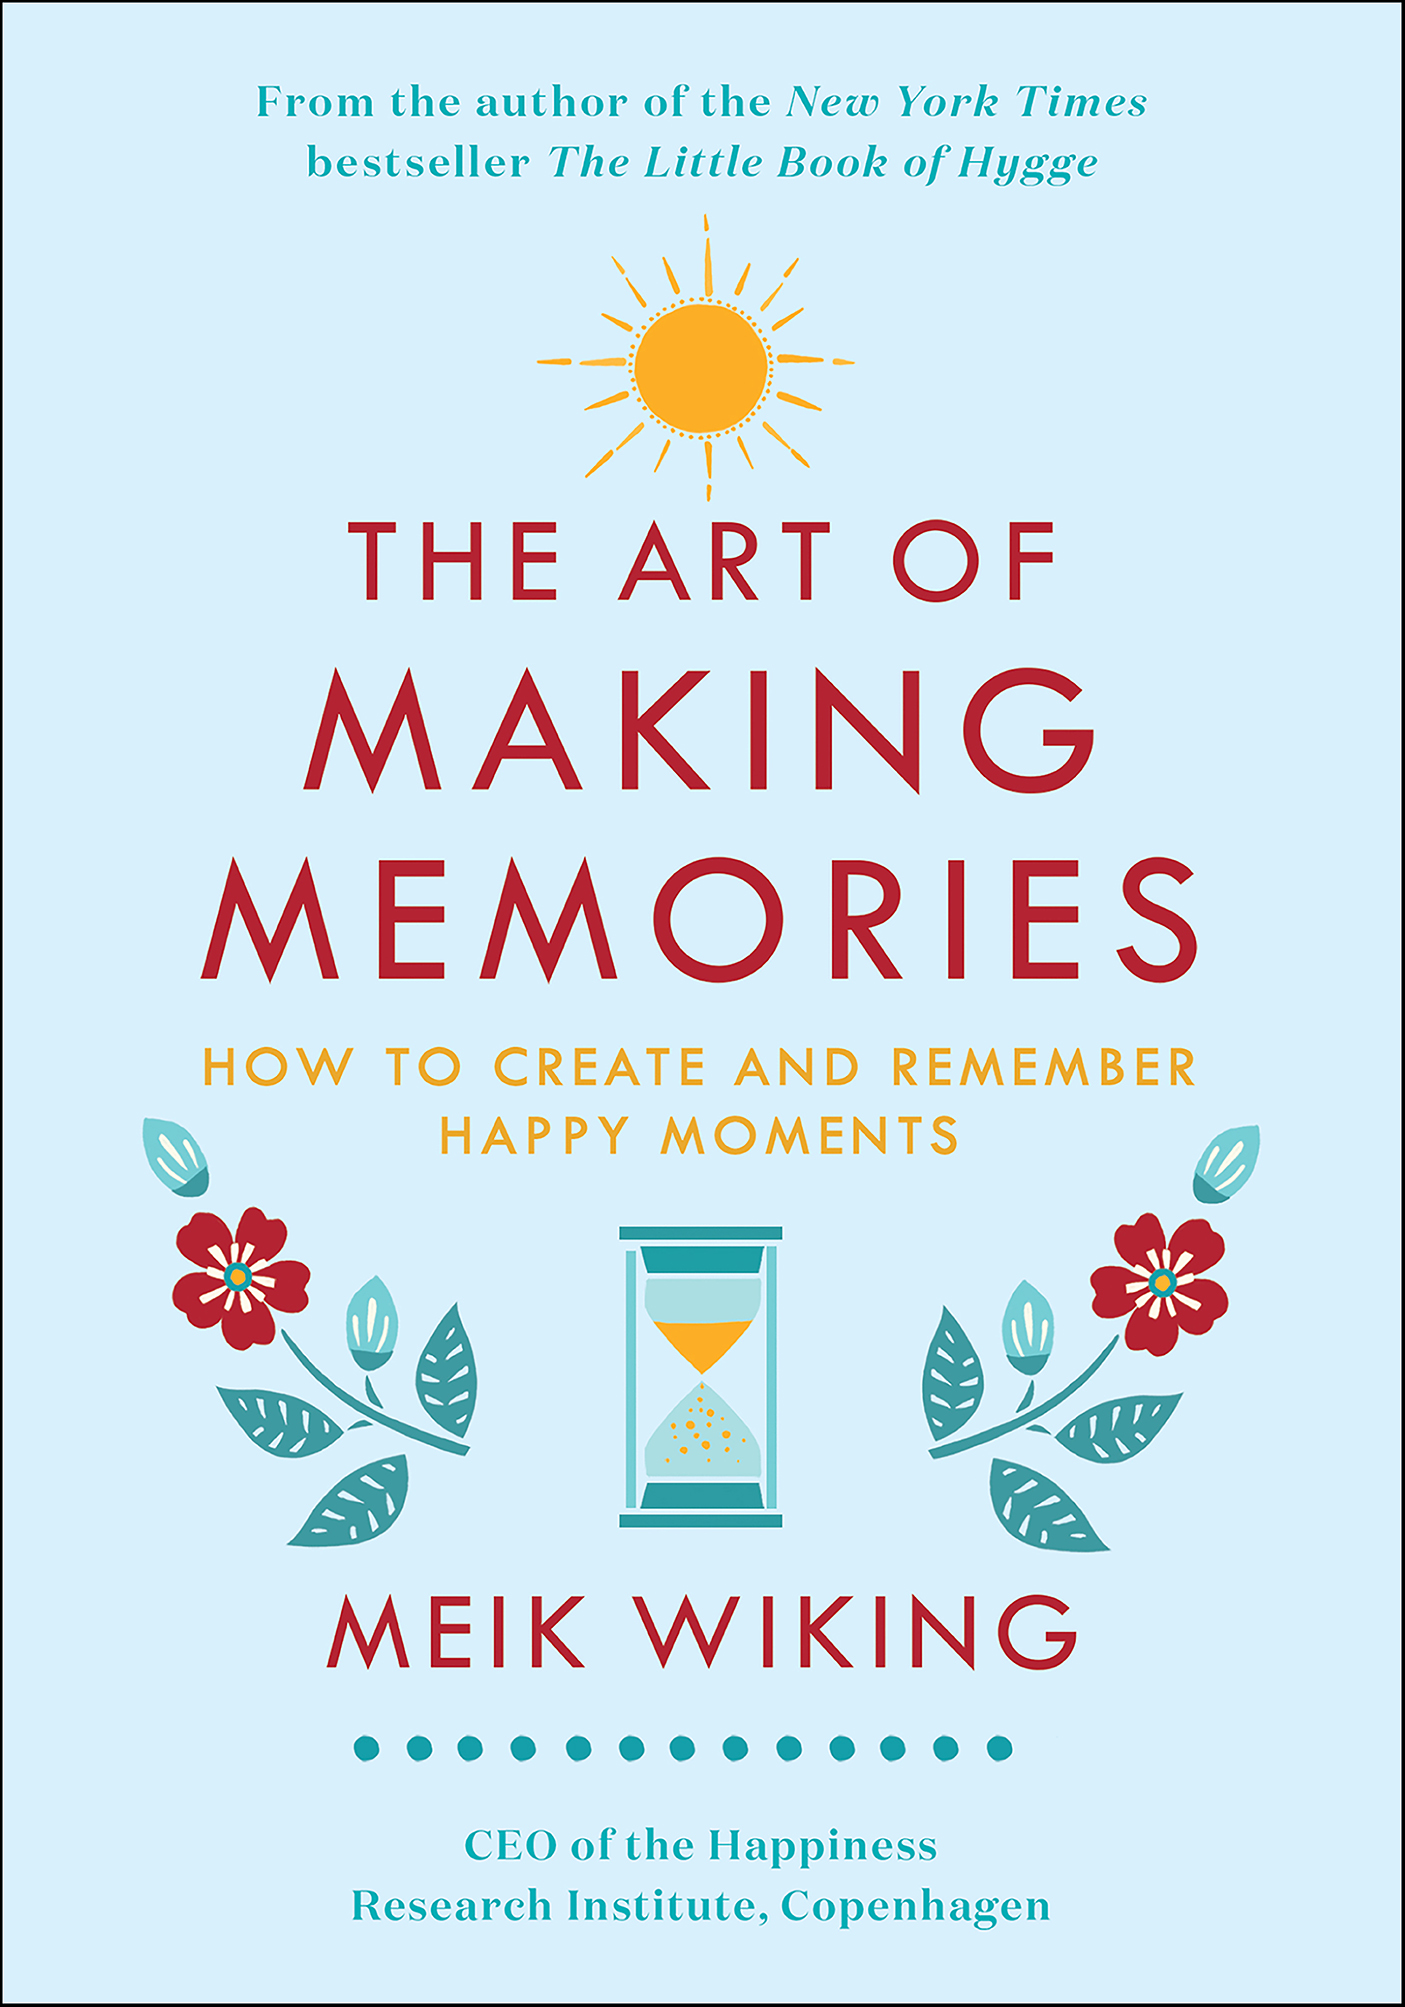 The art of making memories how to create and remember happy moments cover image